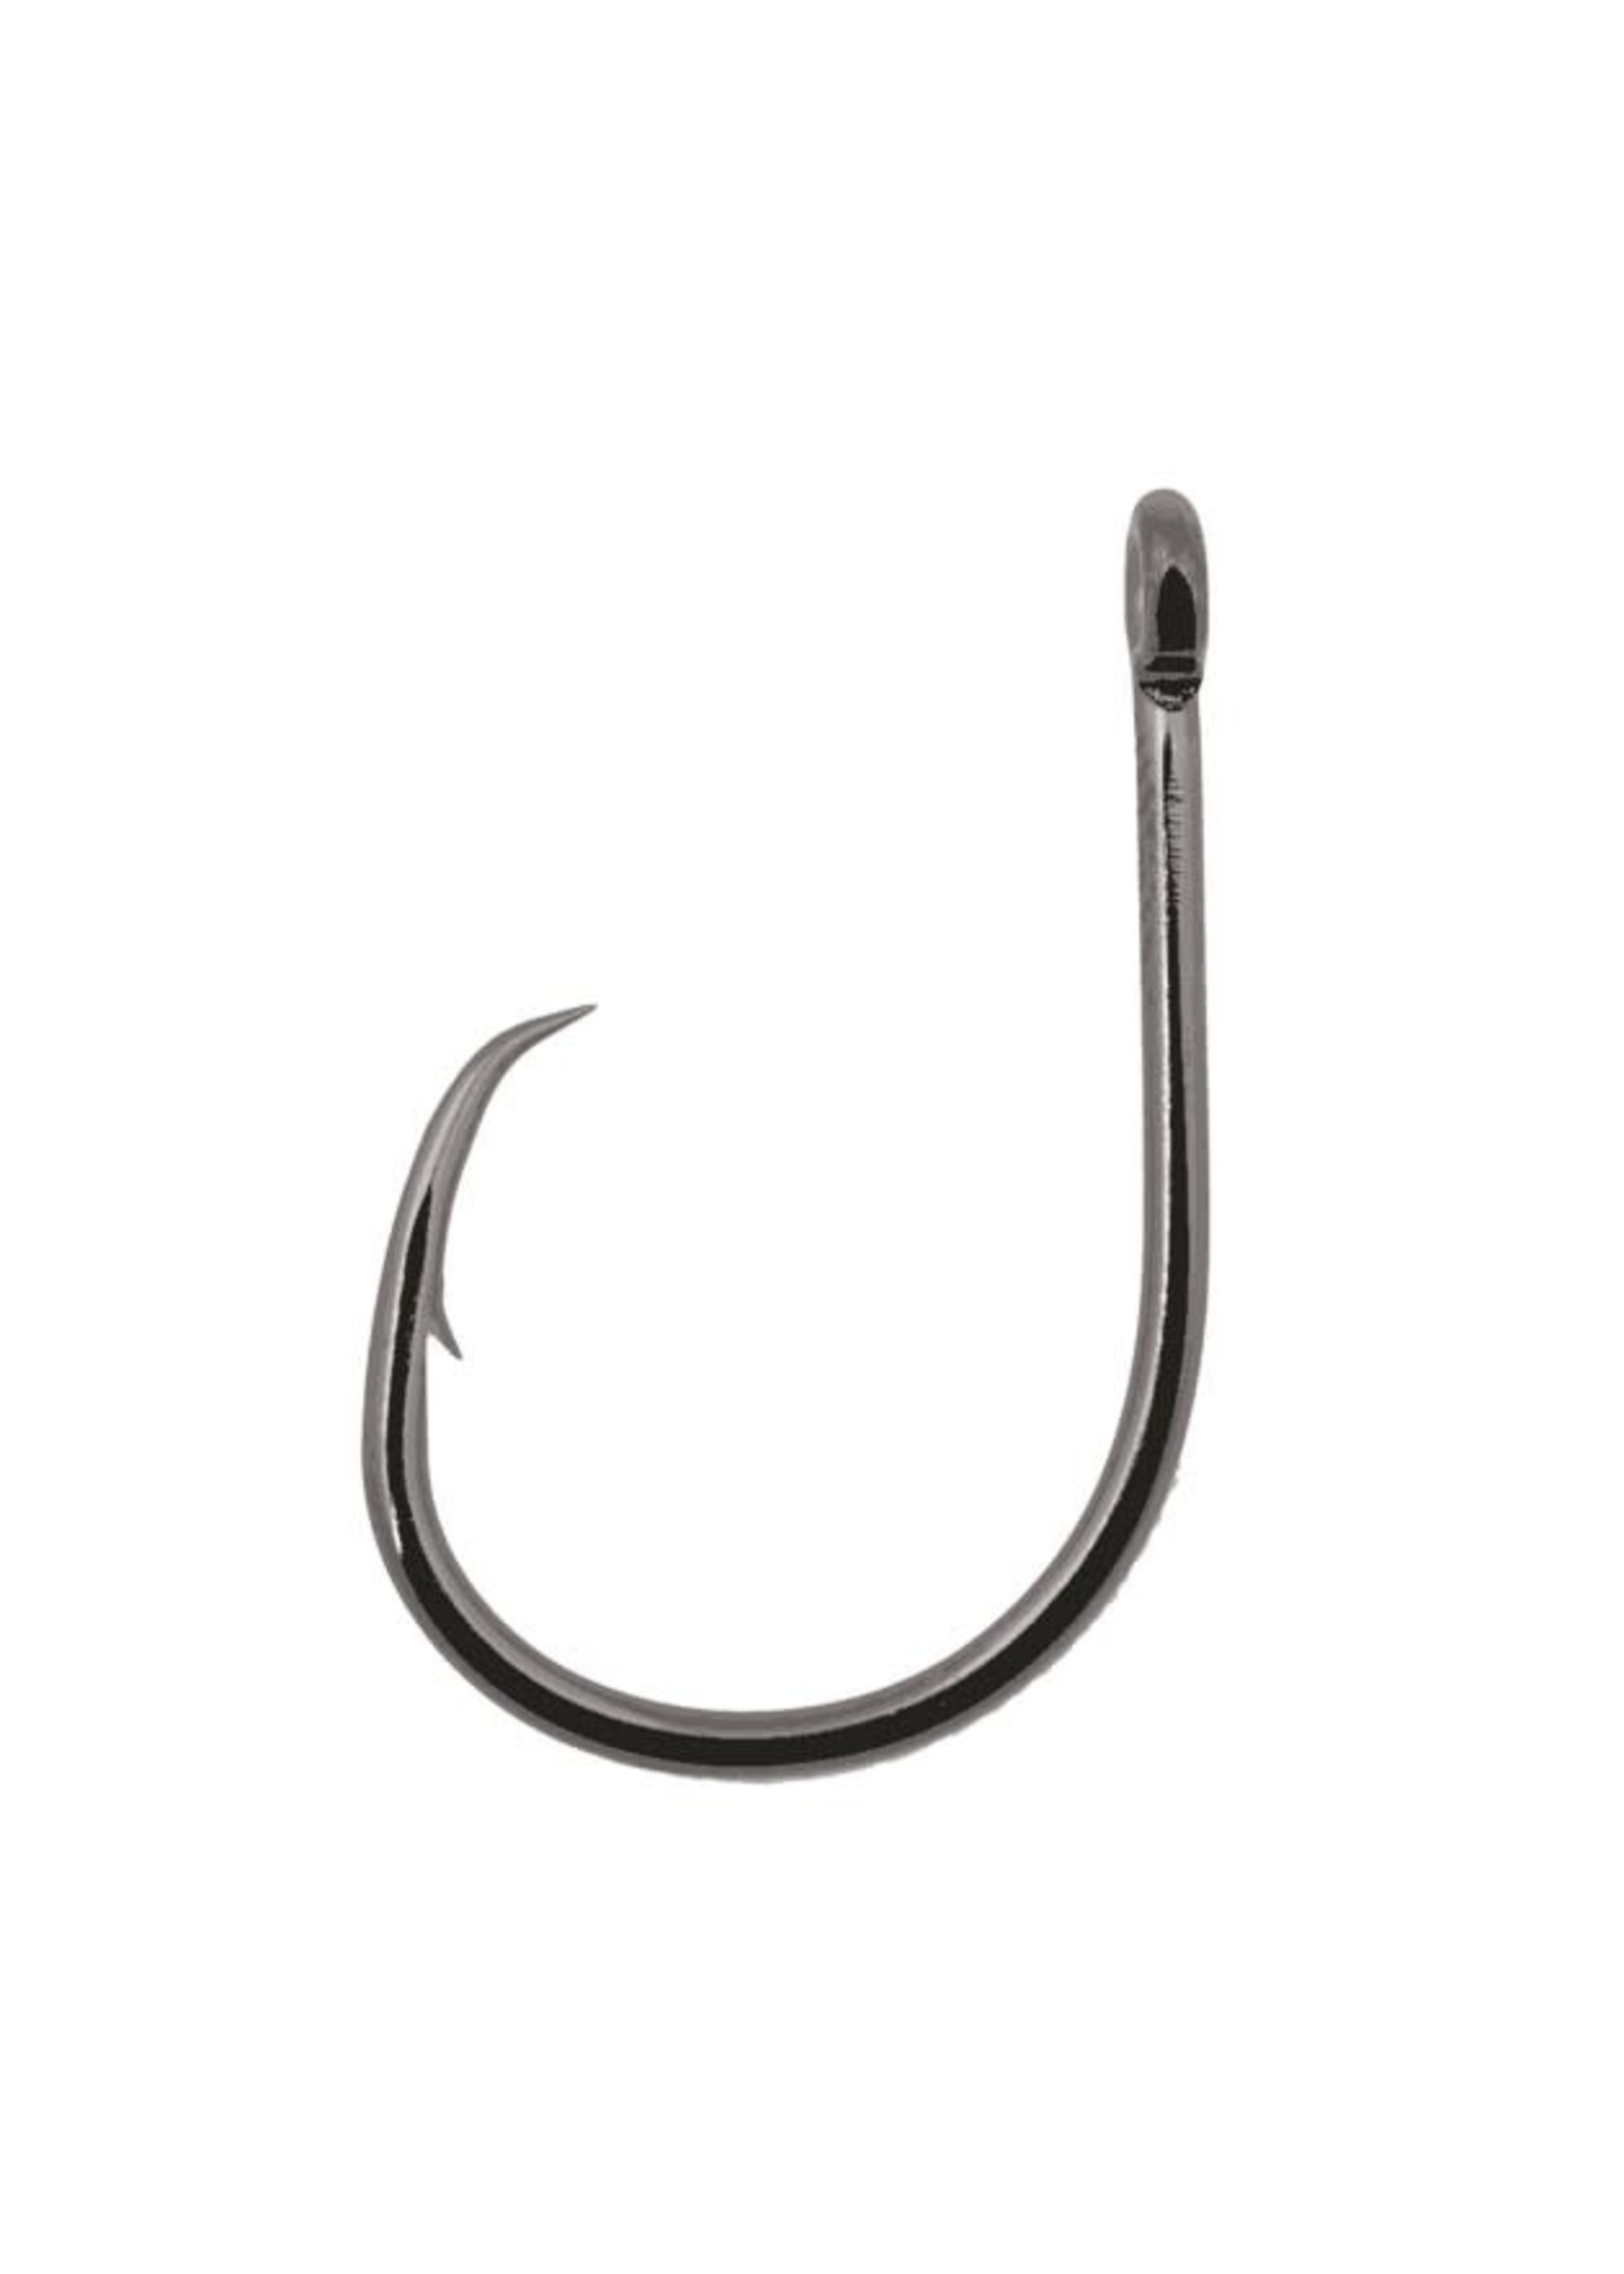 Owner Mosquito Hook 2/0 - Brothers Outdoors LLC